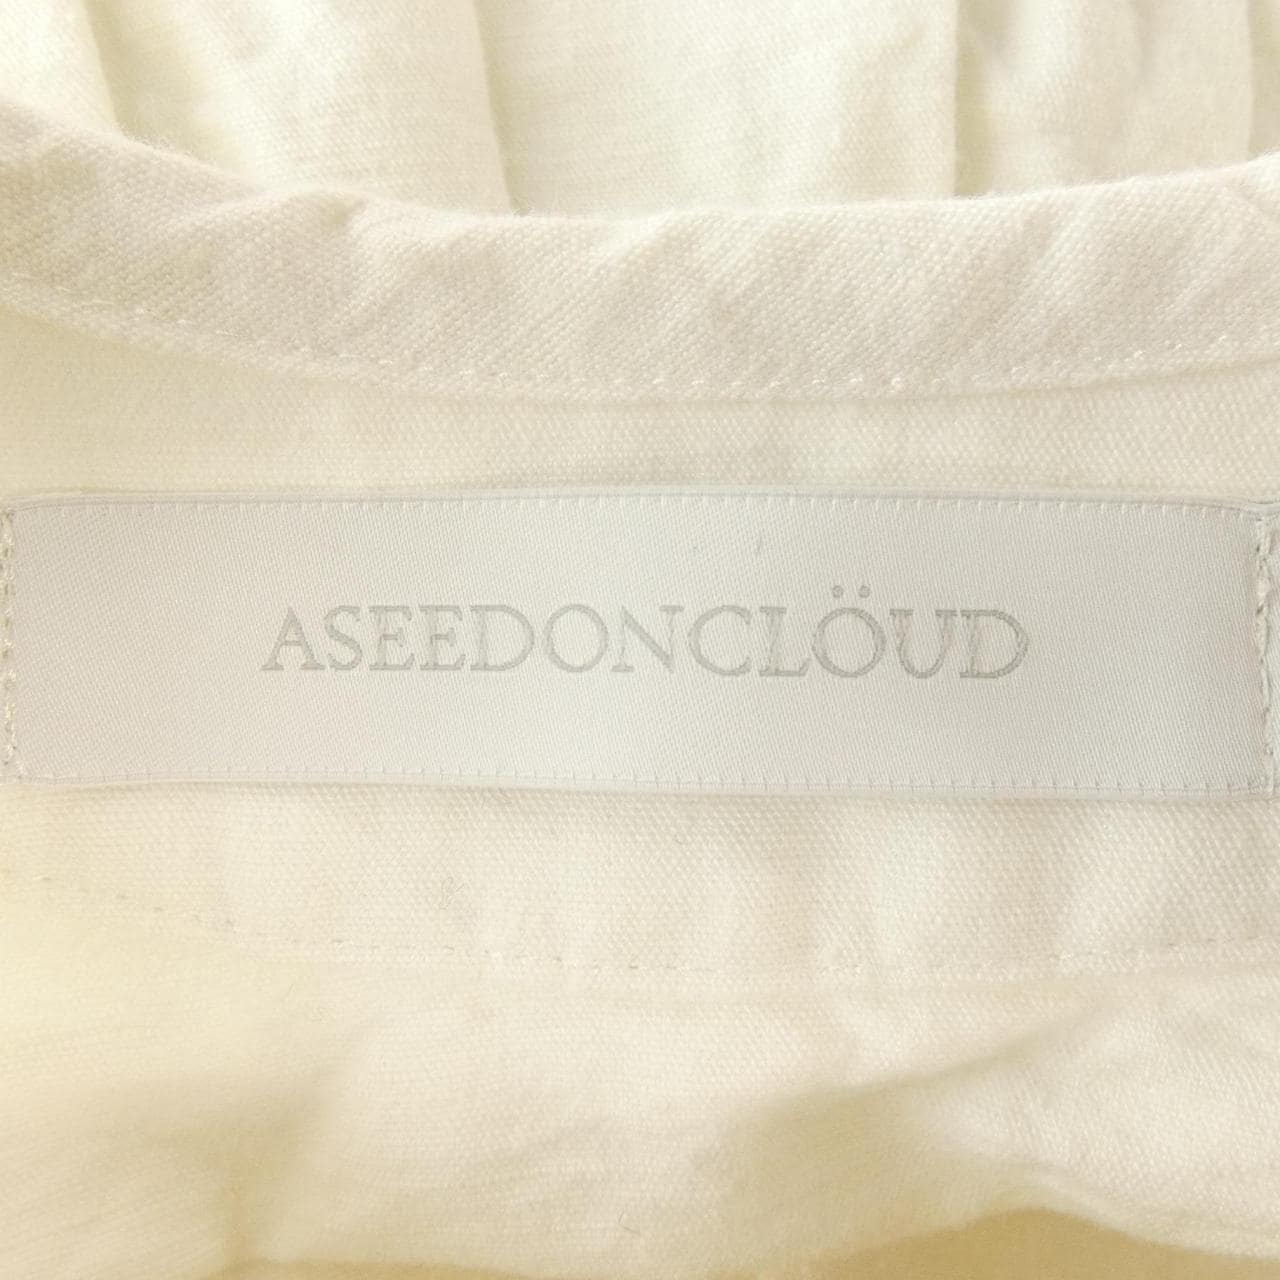 ASEEDONCLOUD夾克